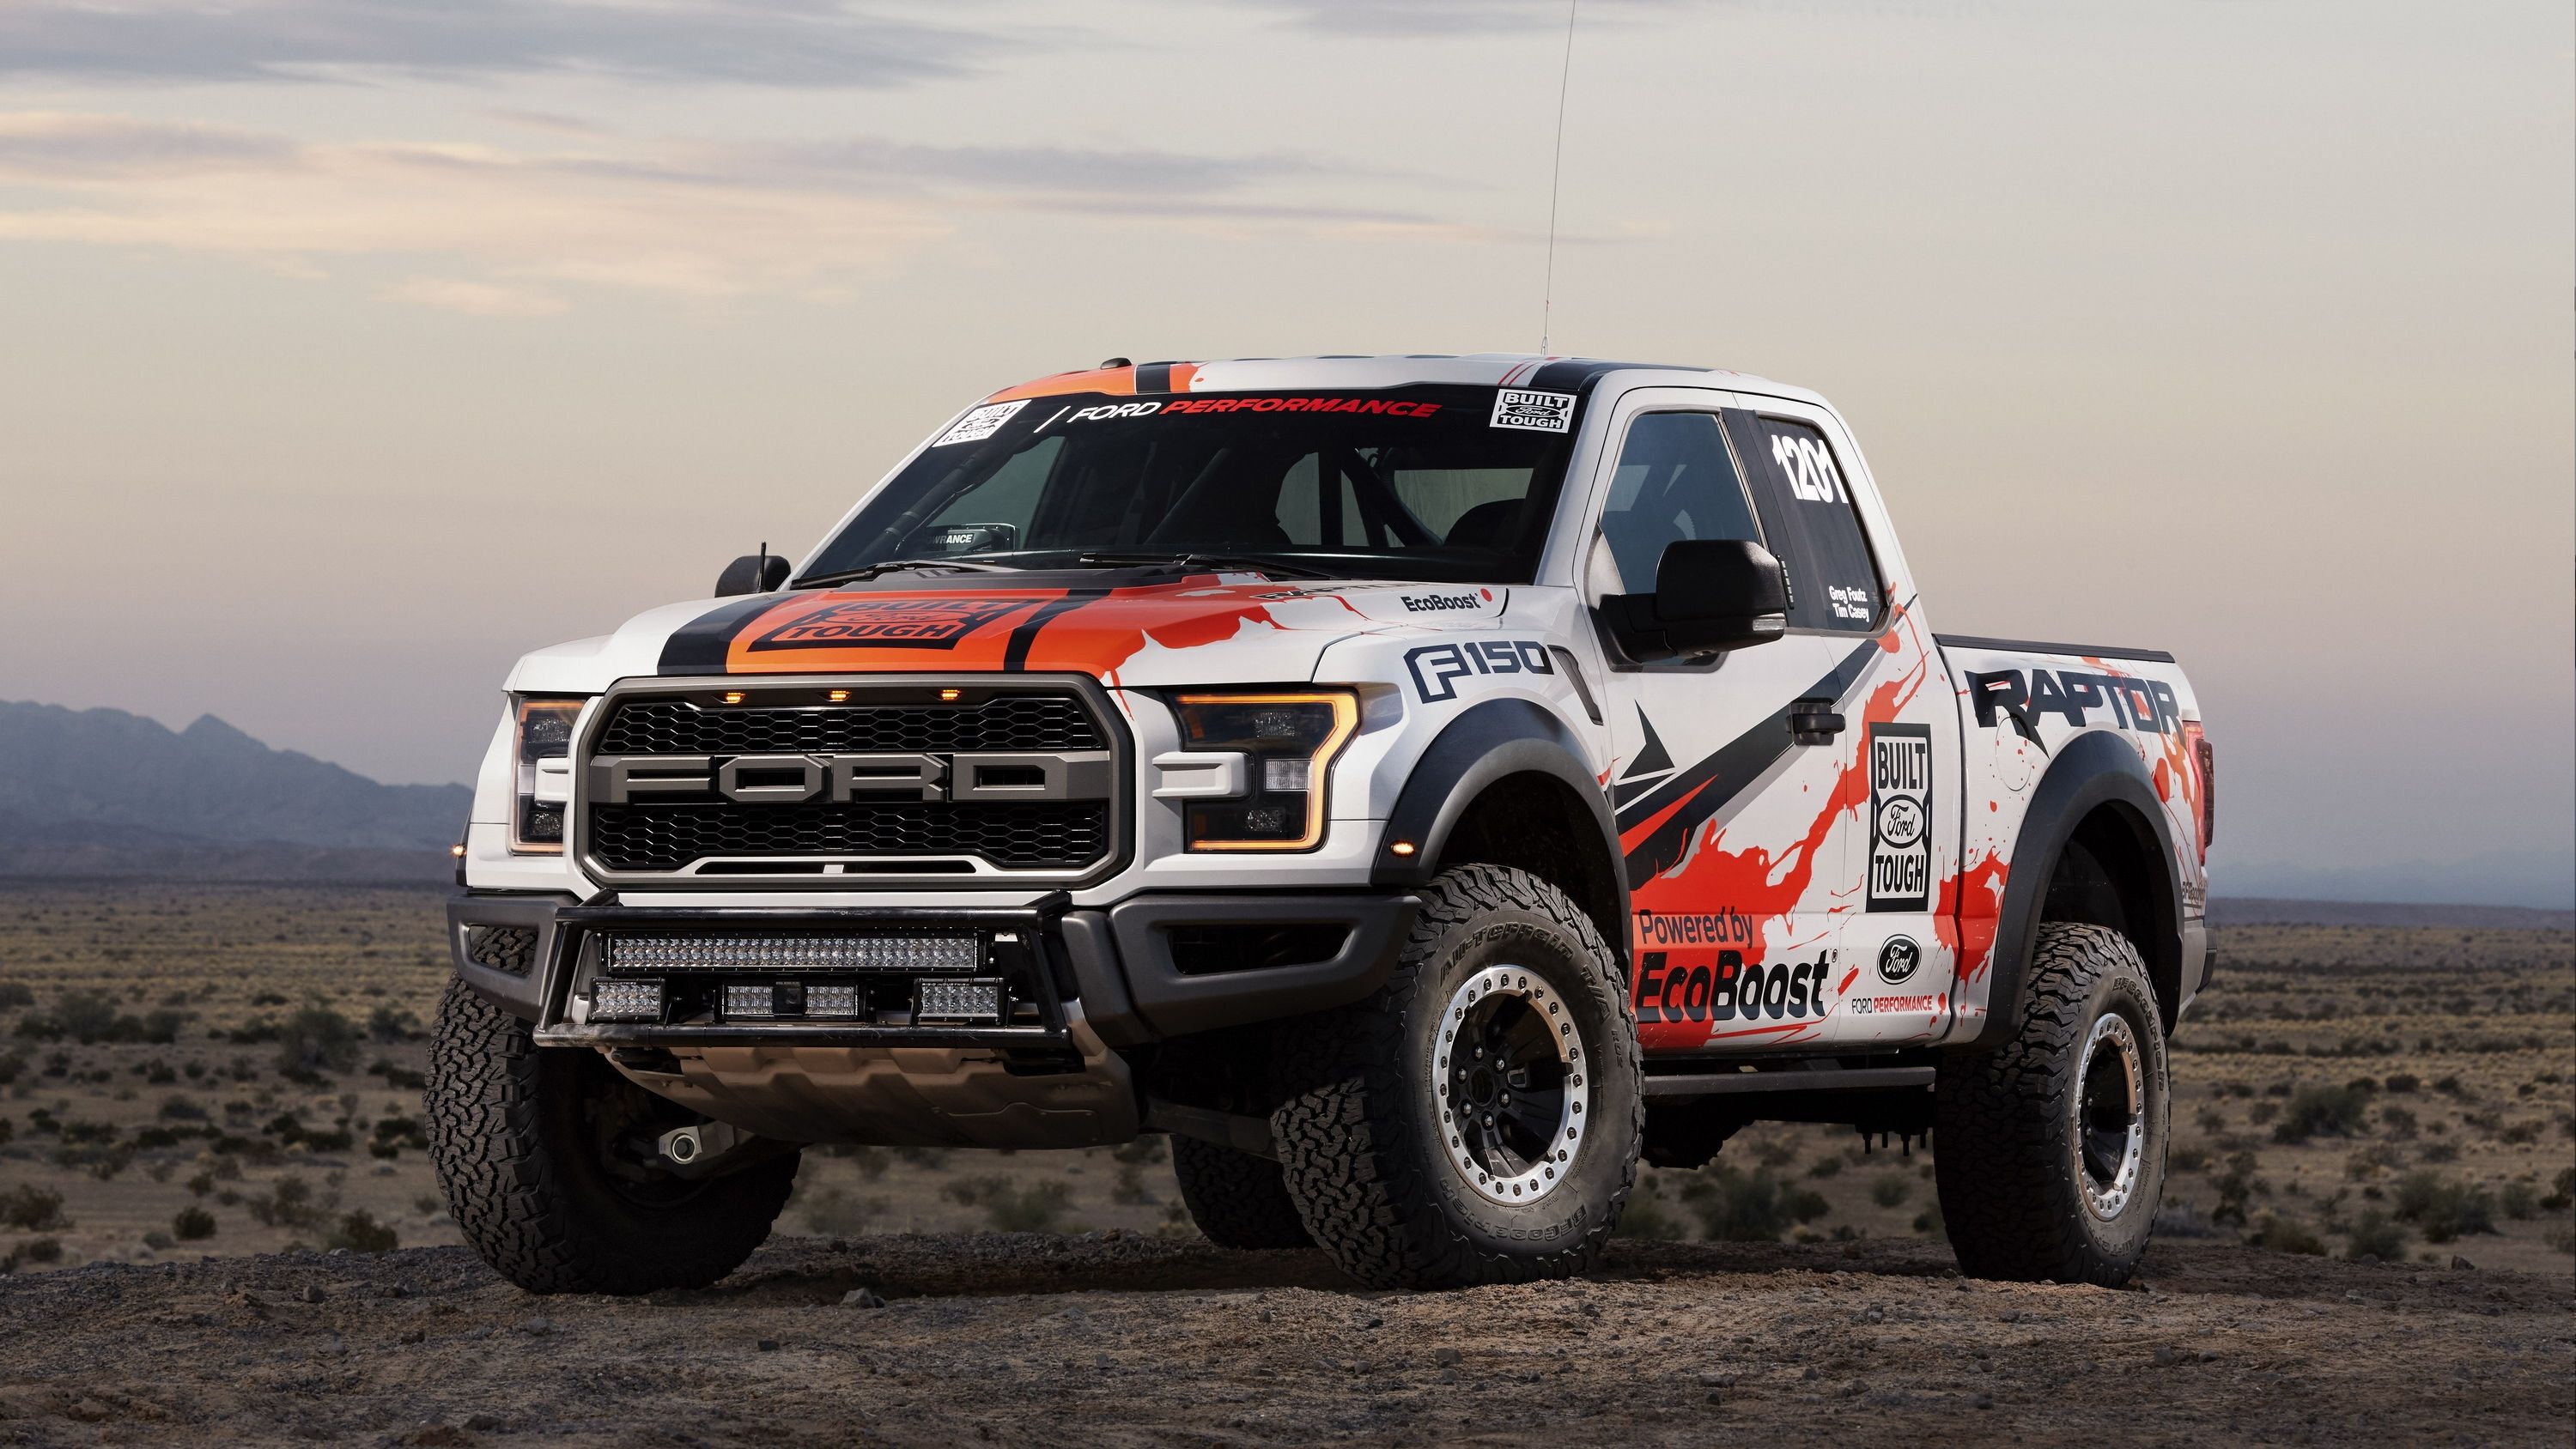 2017 2017 Ford F-150 Raptor Placed Third At Baja 1000 In Stock Full Class Competition